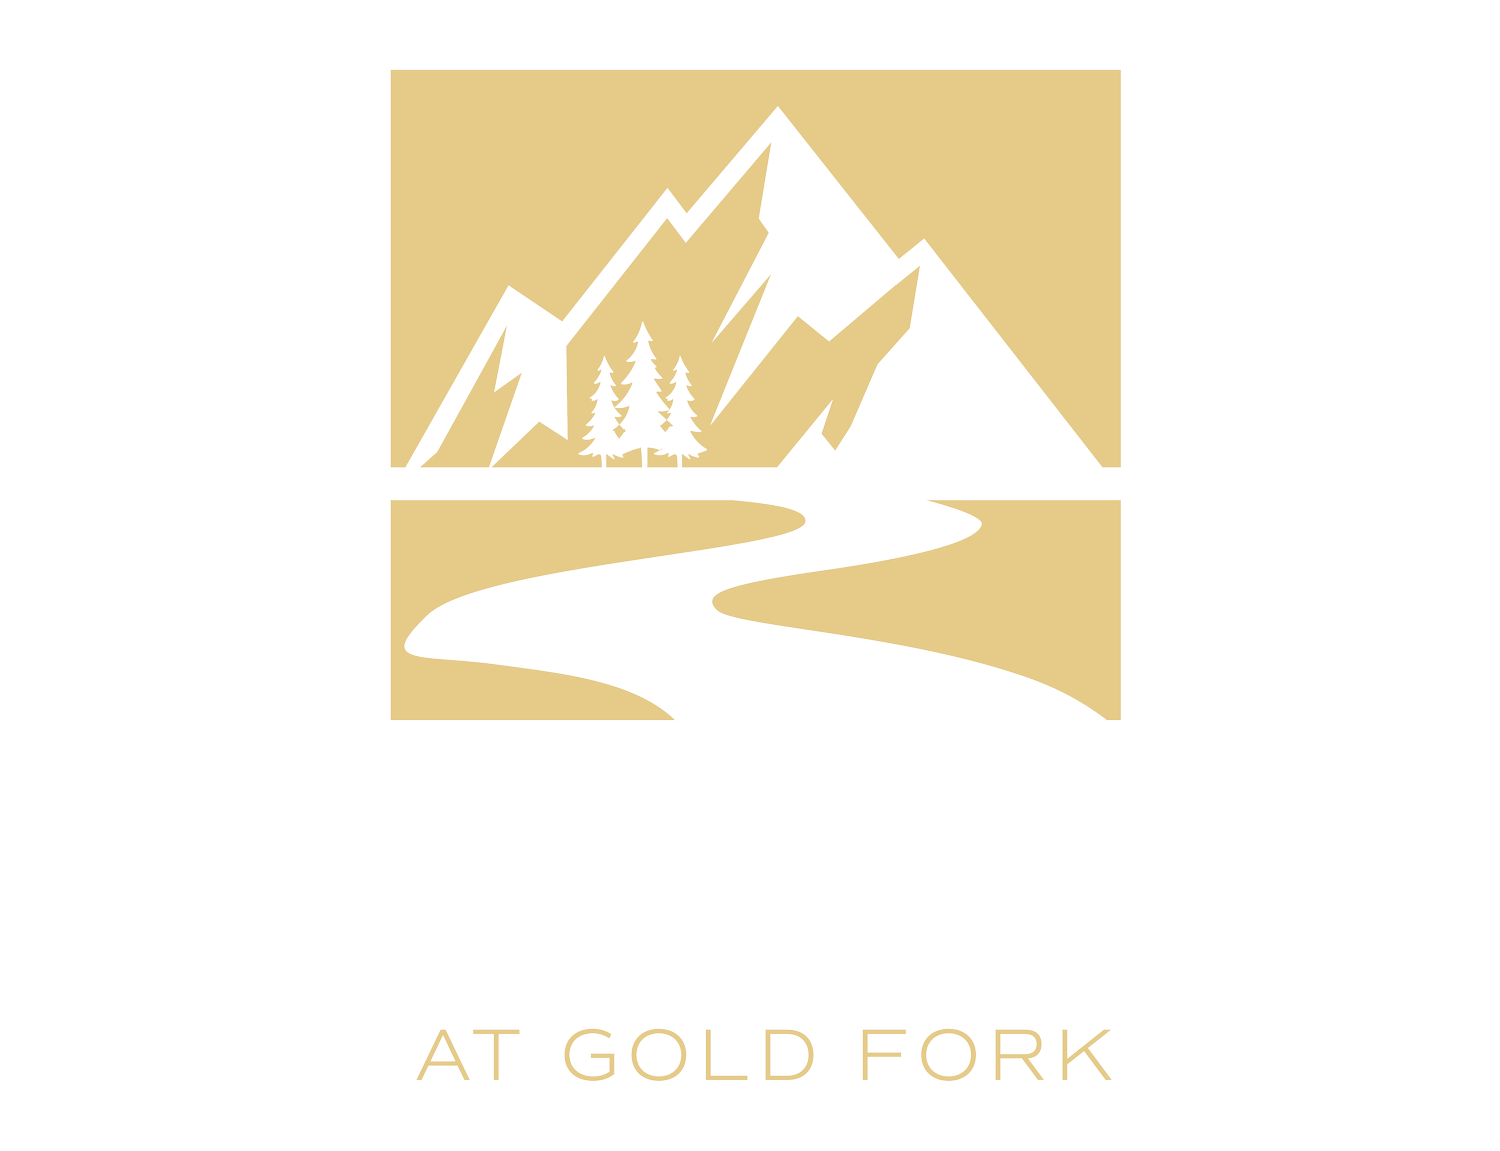 The Reserve at Gold Fork